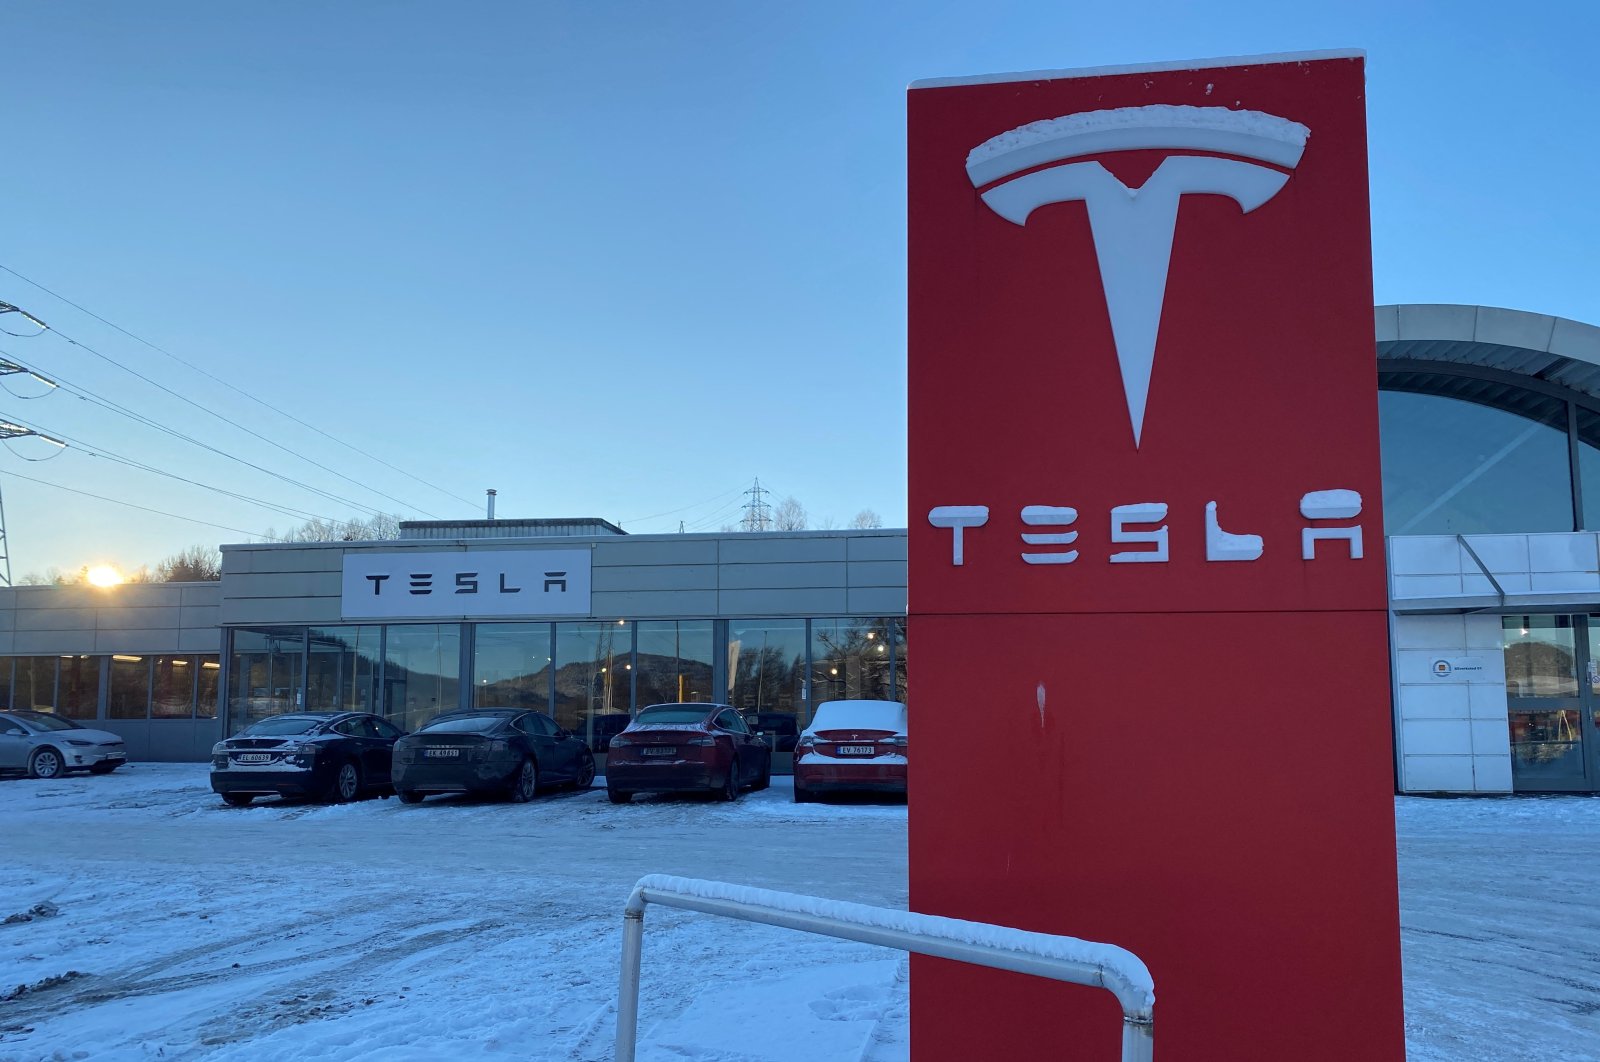 A general view of a Tesla store in Porsgrunn, Norway, Dec. 24, 2021. (Reuters Photo)